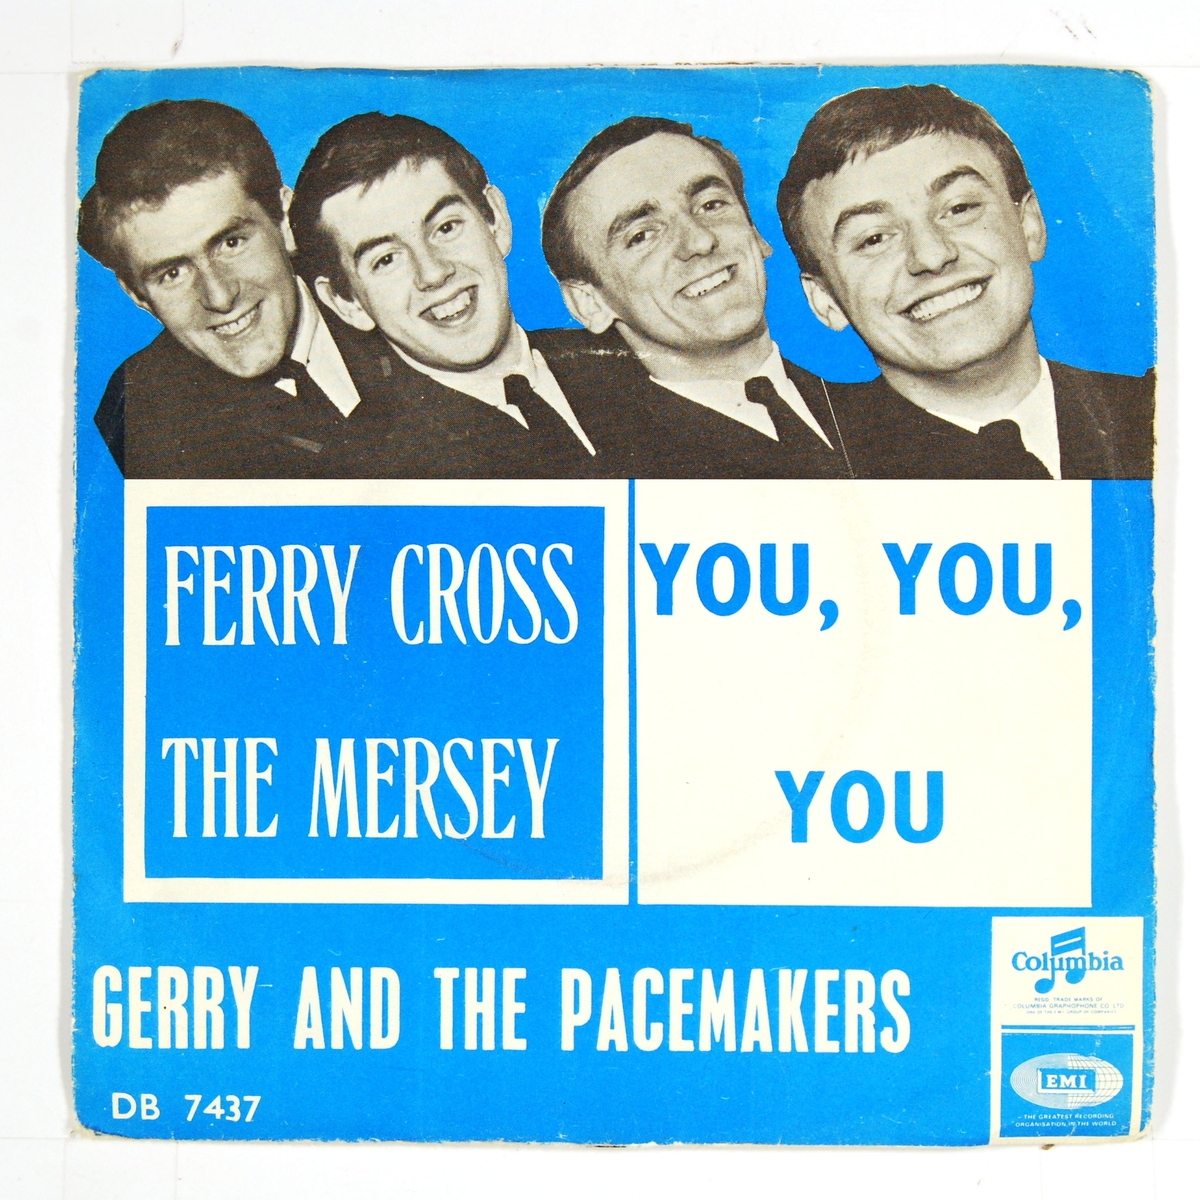 Fotografi av "Gerry and the Pacemakers".